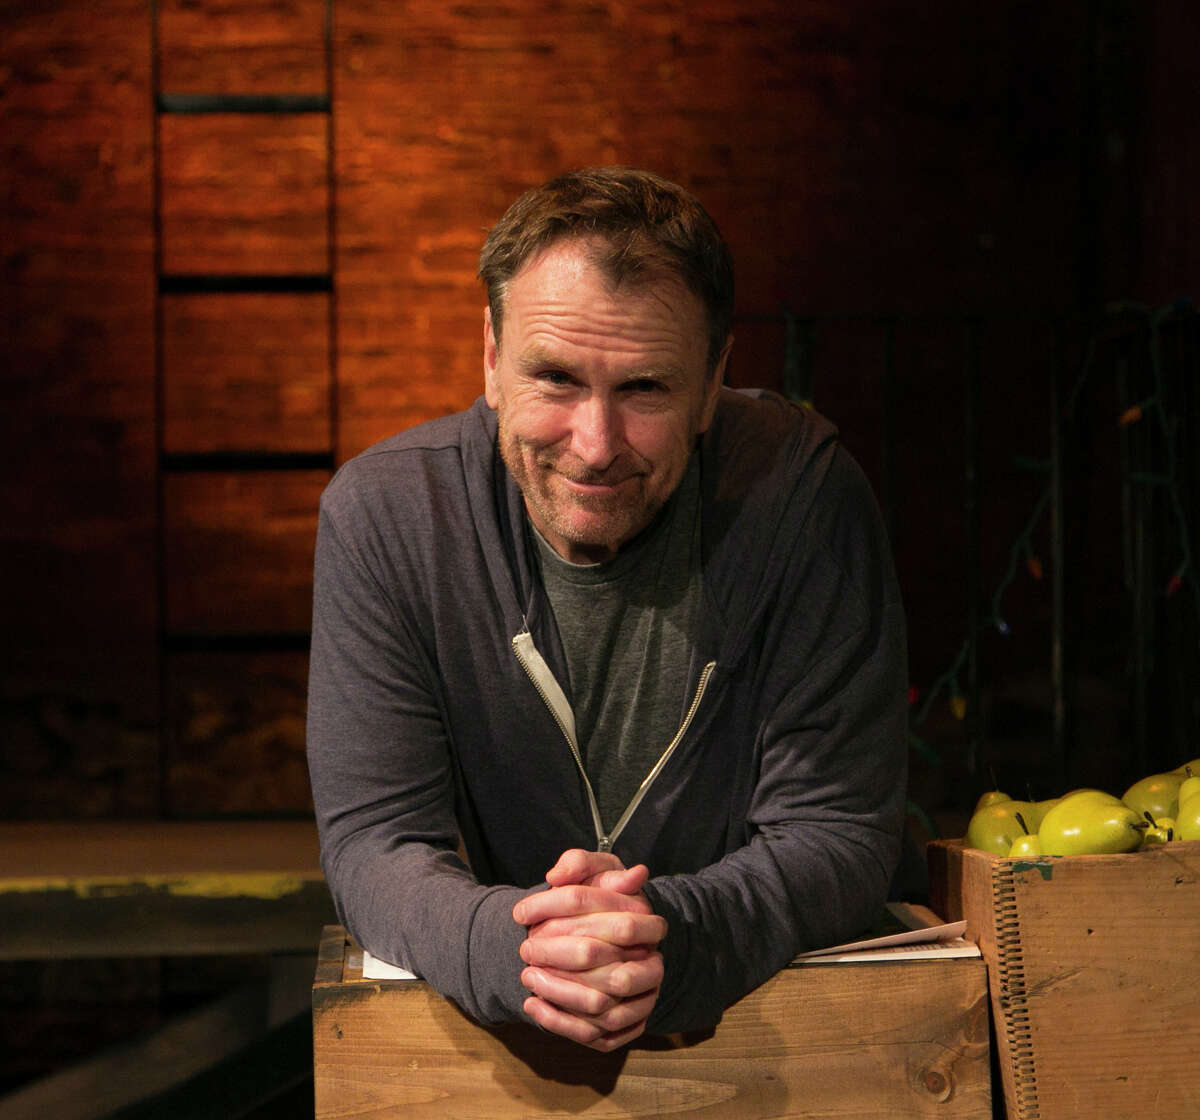 Comedian Colin Quinn will bring his new show, "The Last Best Hope," to The Egg in Albany on Jan. 14, 2022. The show ran off-Broadway for three weeks in November 2021.